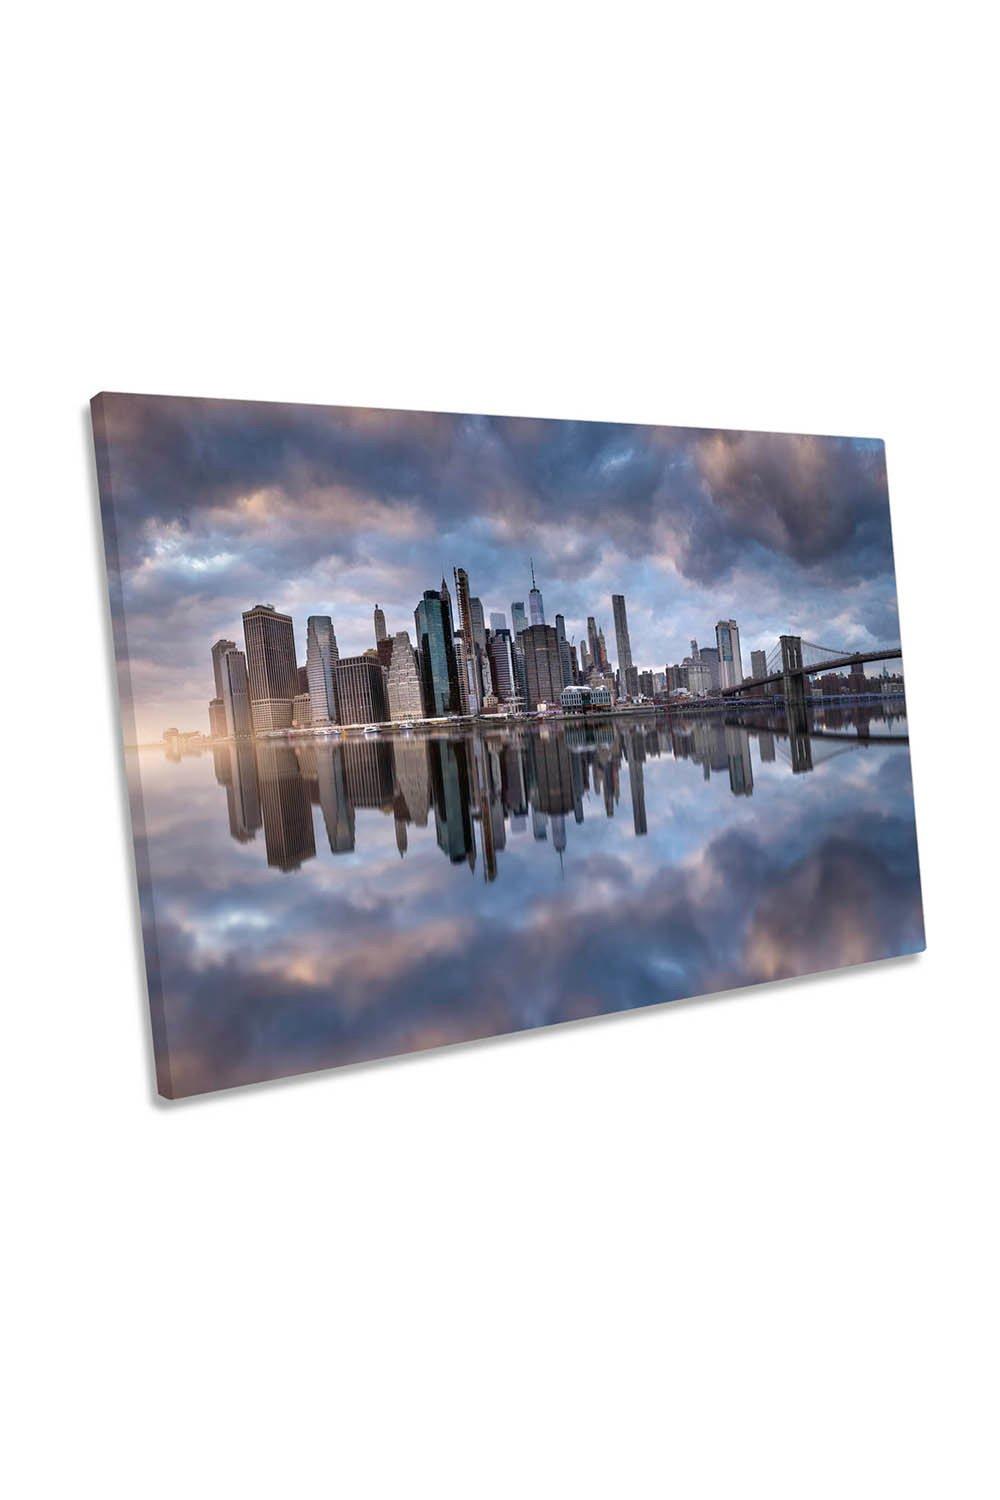 NYC New York City Blue Skyline Canvas Wall Art Picture Print